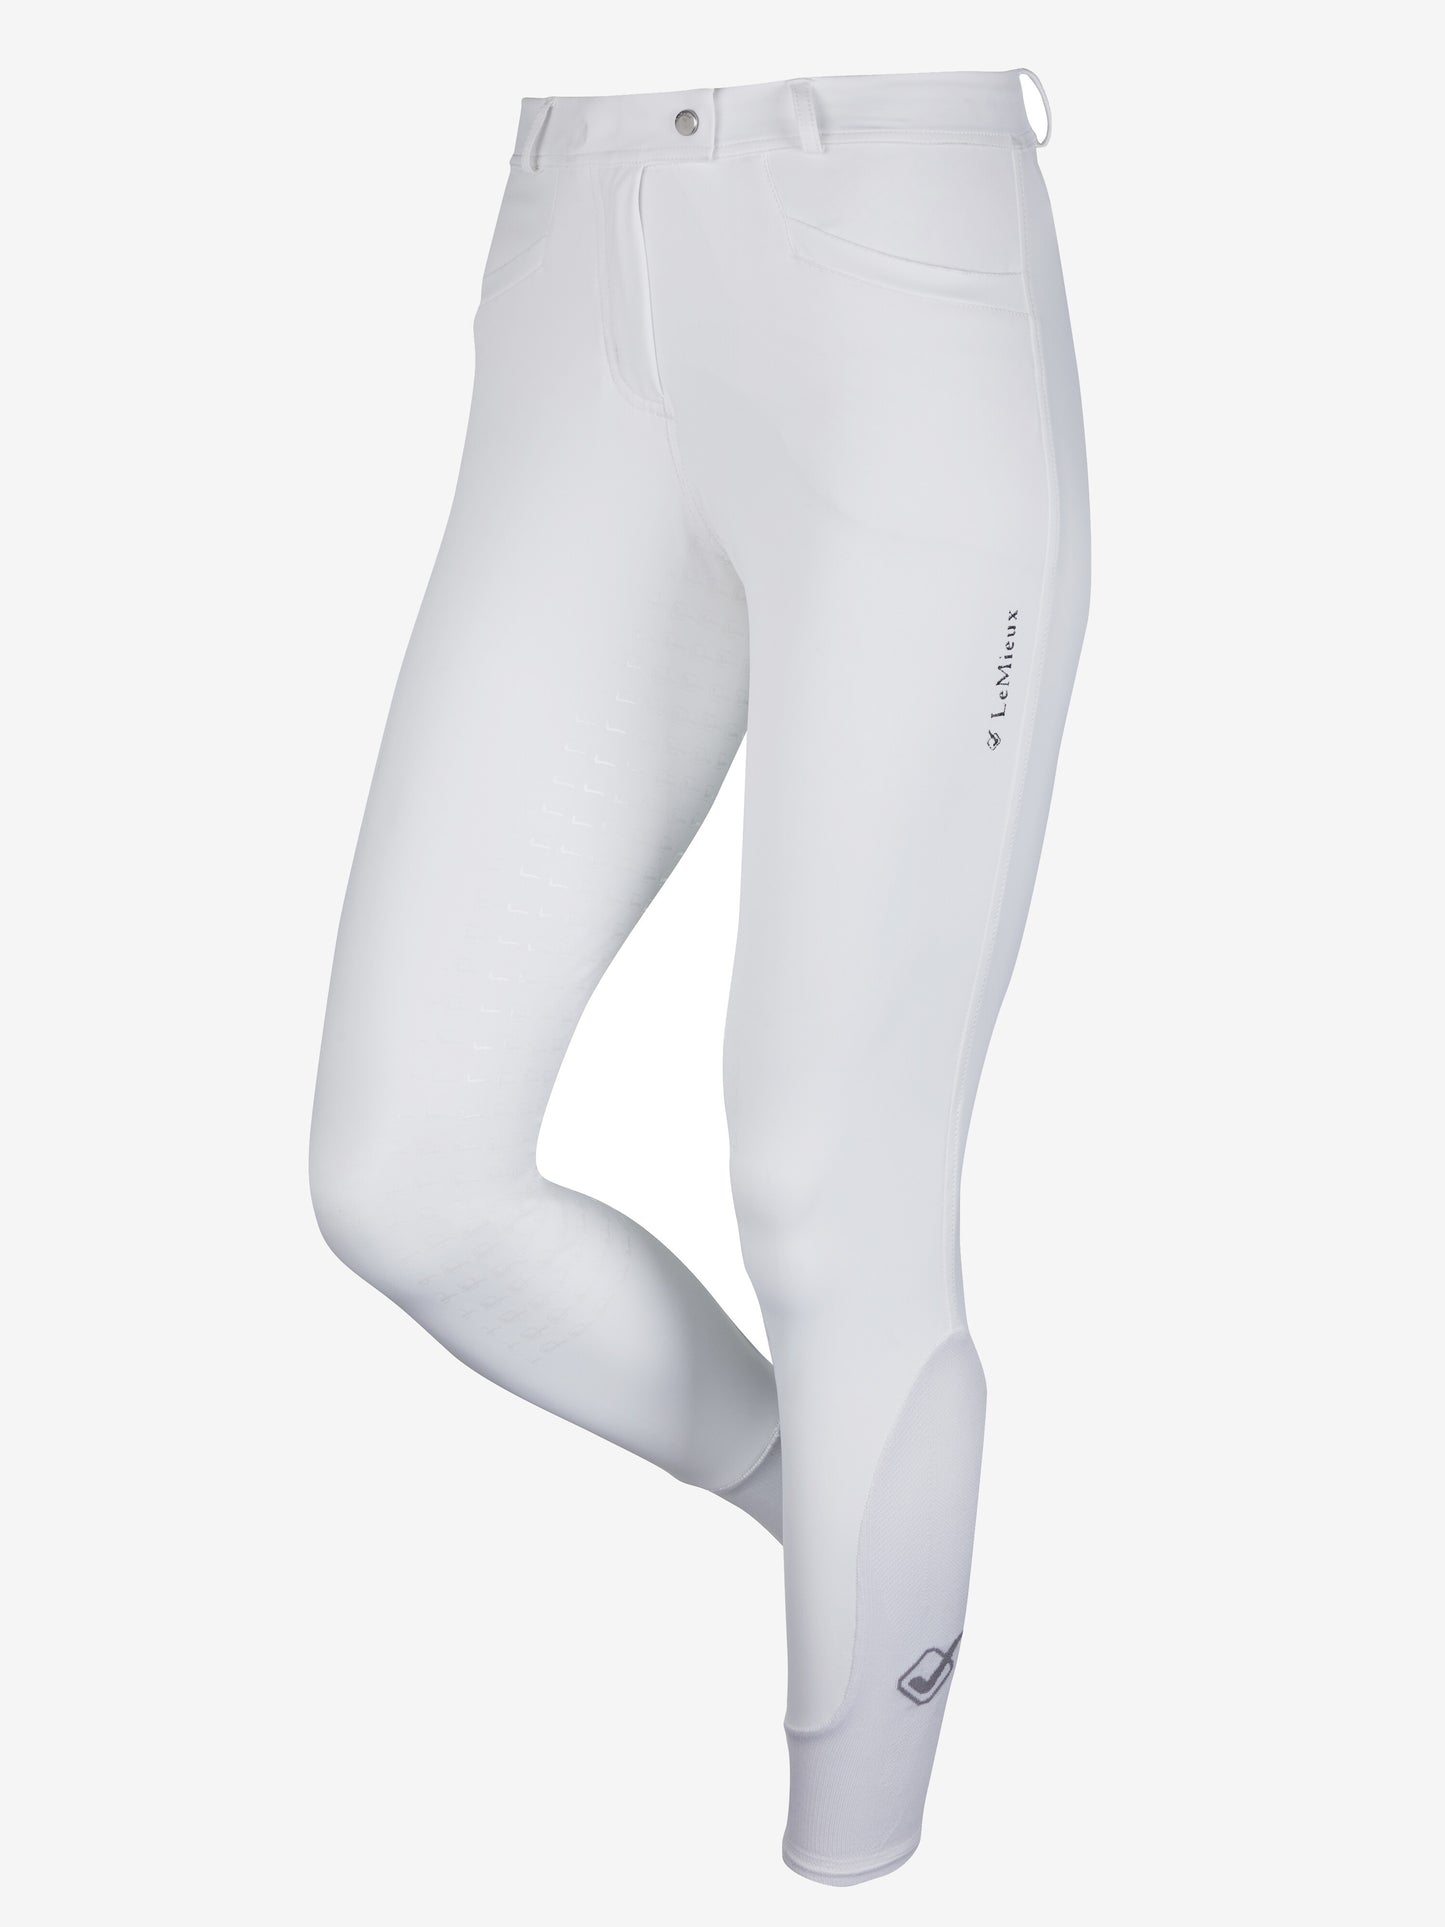 LeMieux Dynamique Full Seat Breeches – The Horse of Course